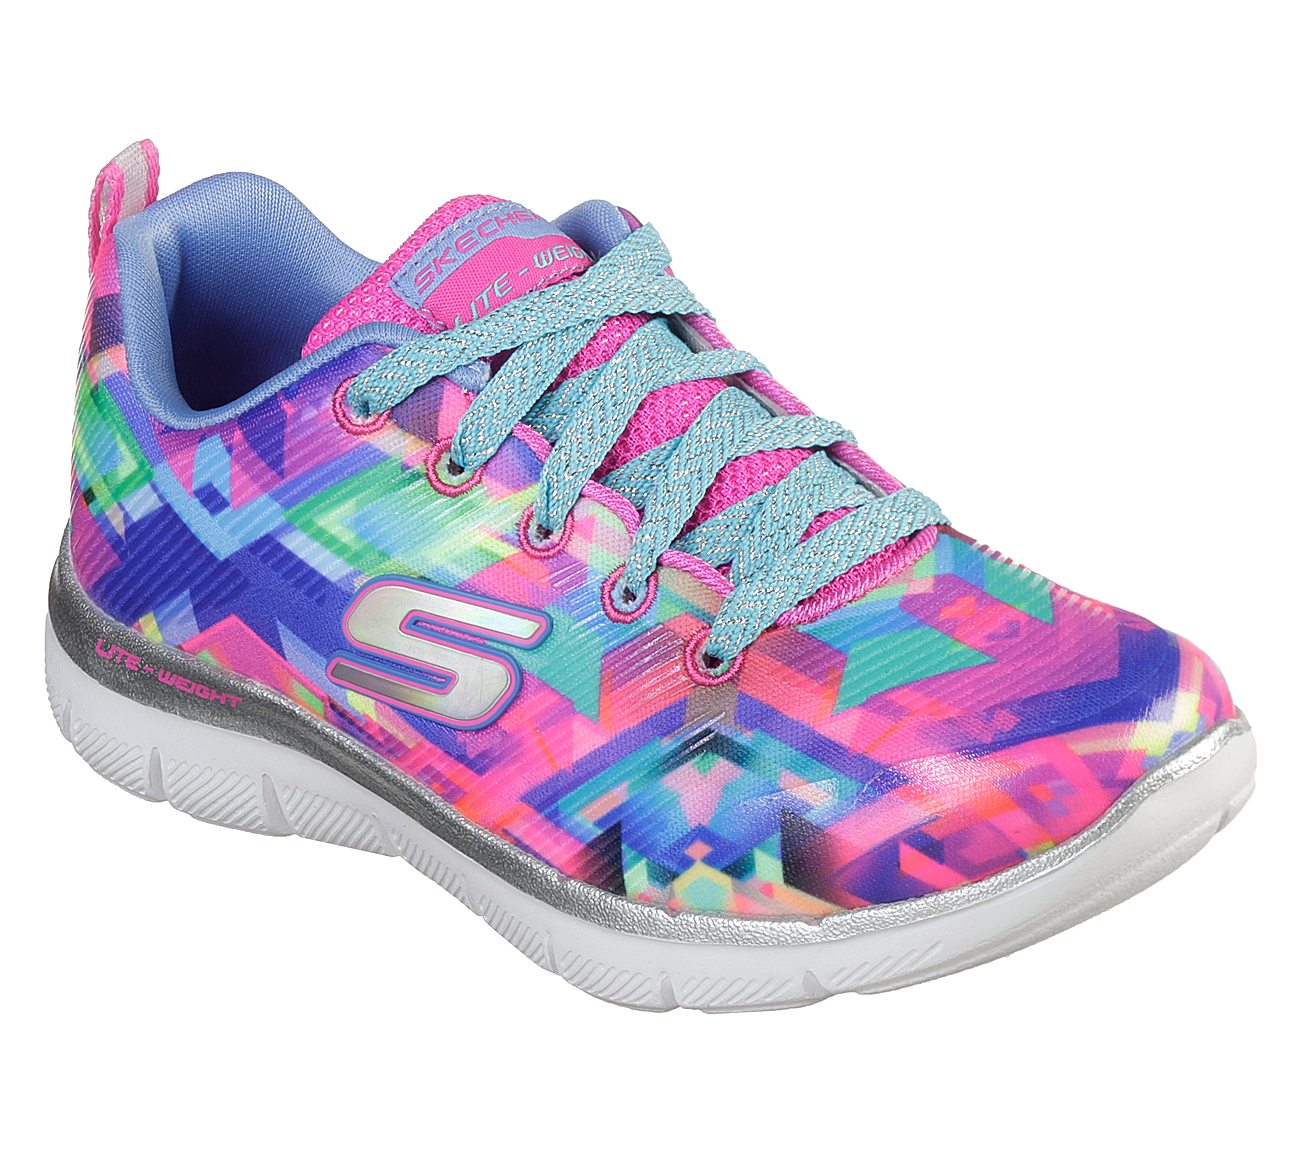 colorful skechers shoes off 75 